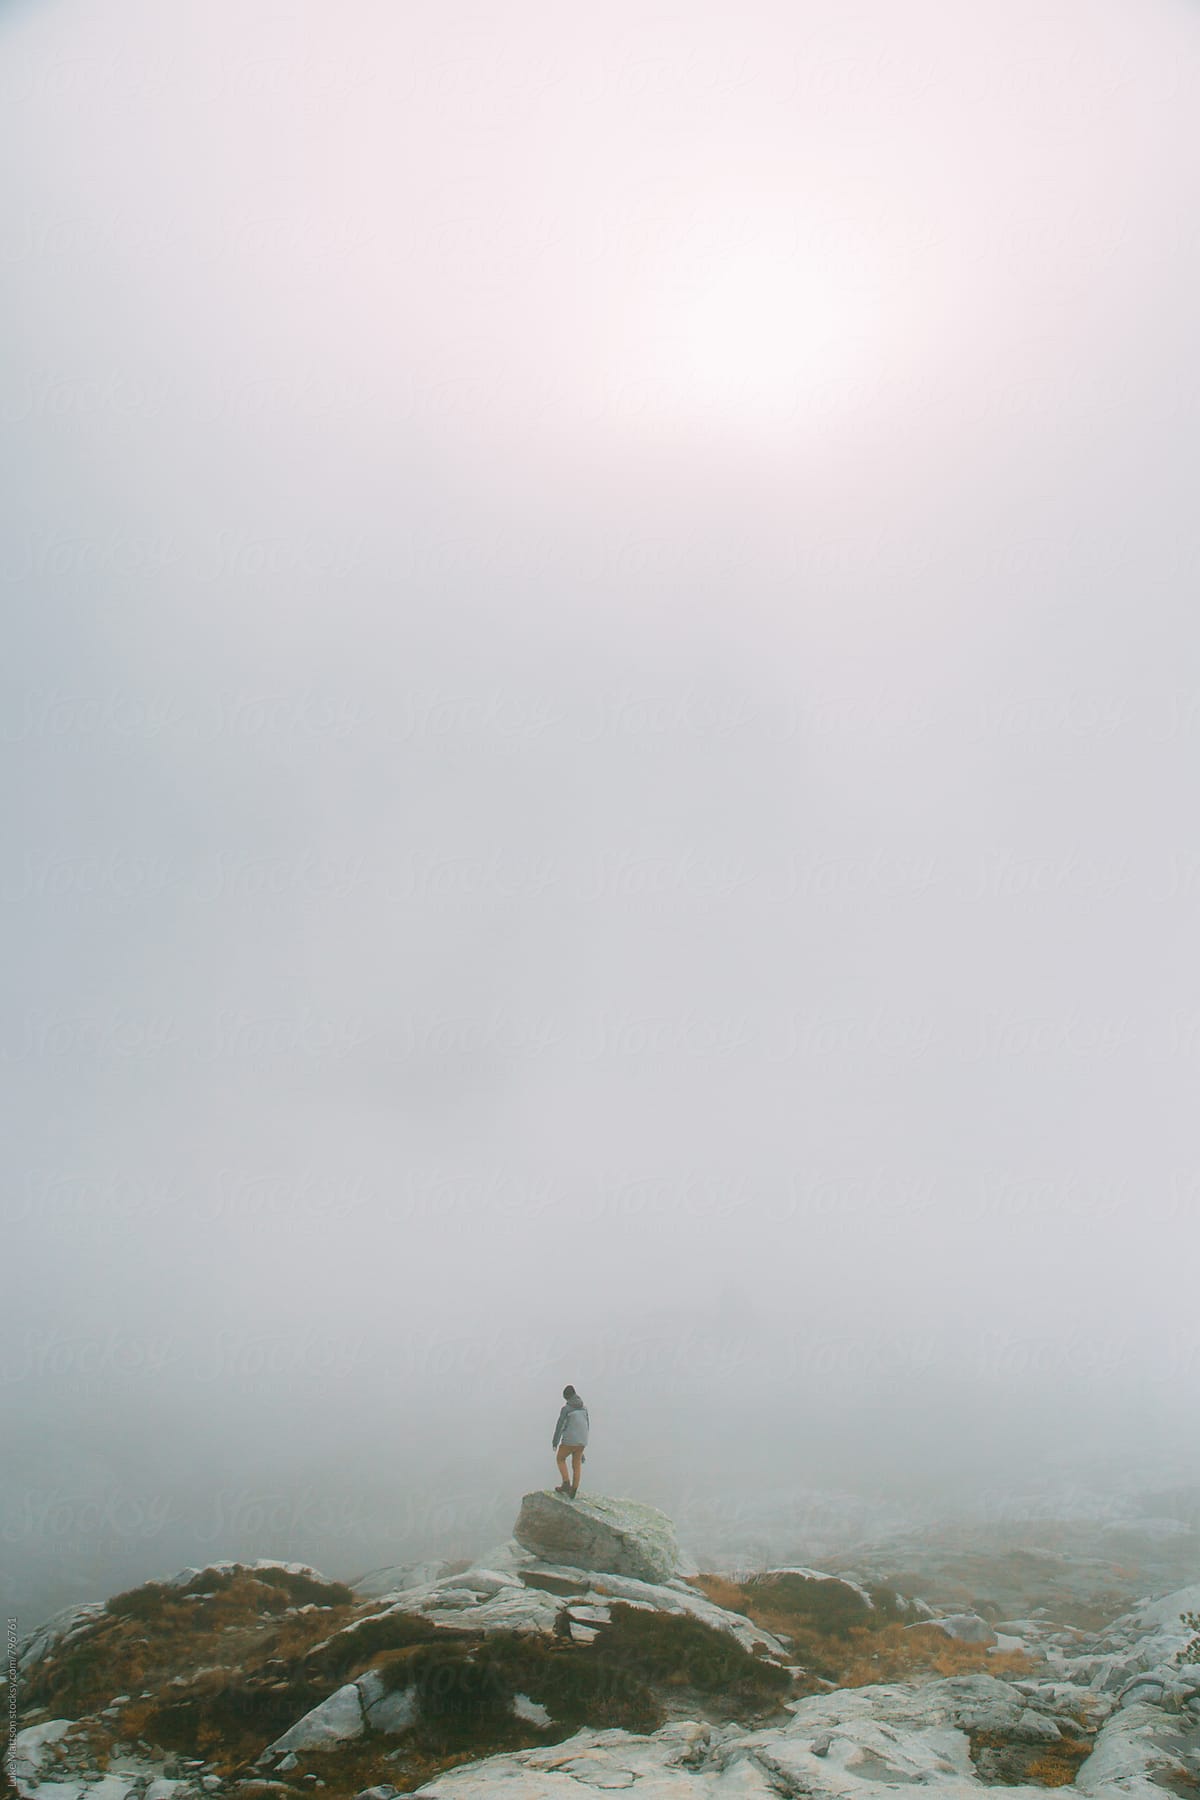 Man Standing Alone On Granite Boulder In Thick Fog